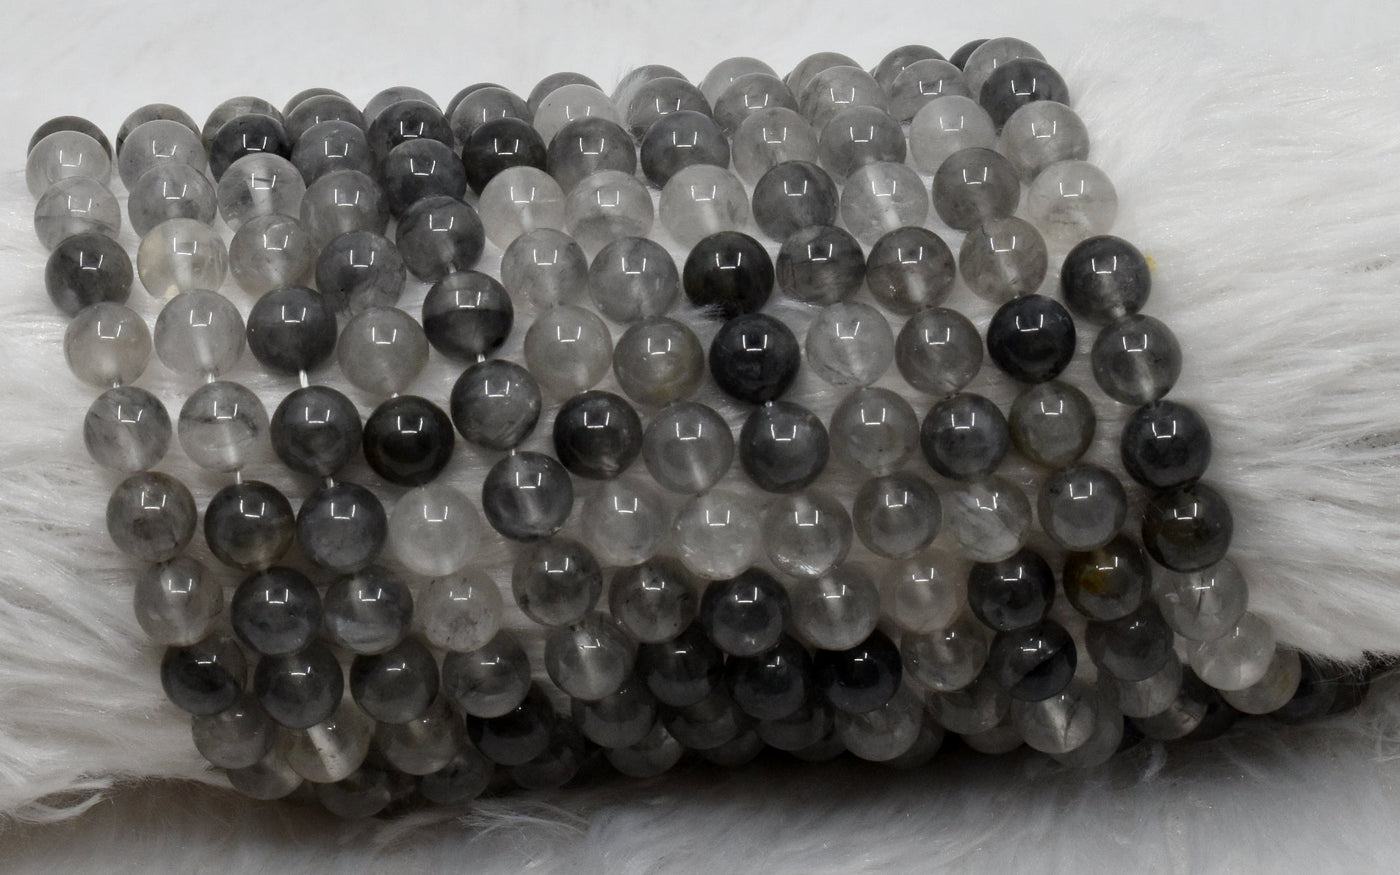 Cloudy Quartz Beads, Natural Round Crystal Beads 6mm to 10mm